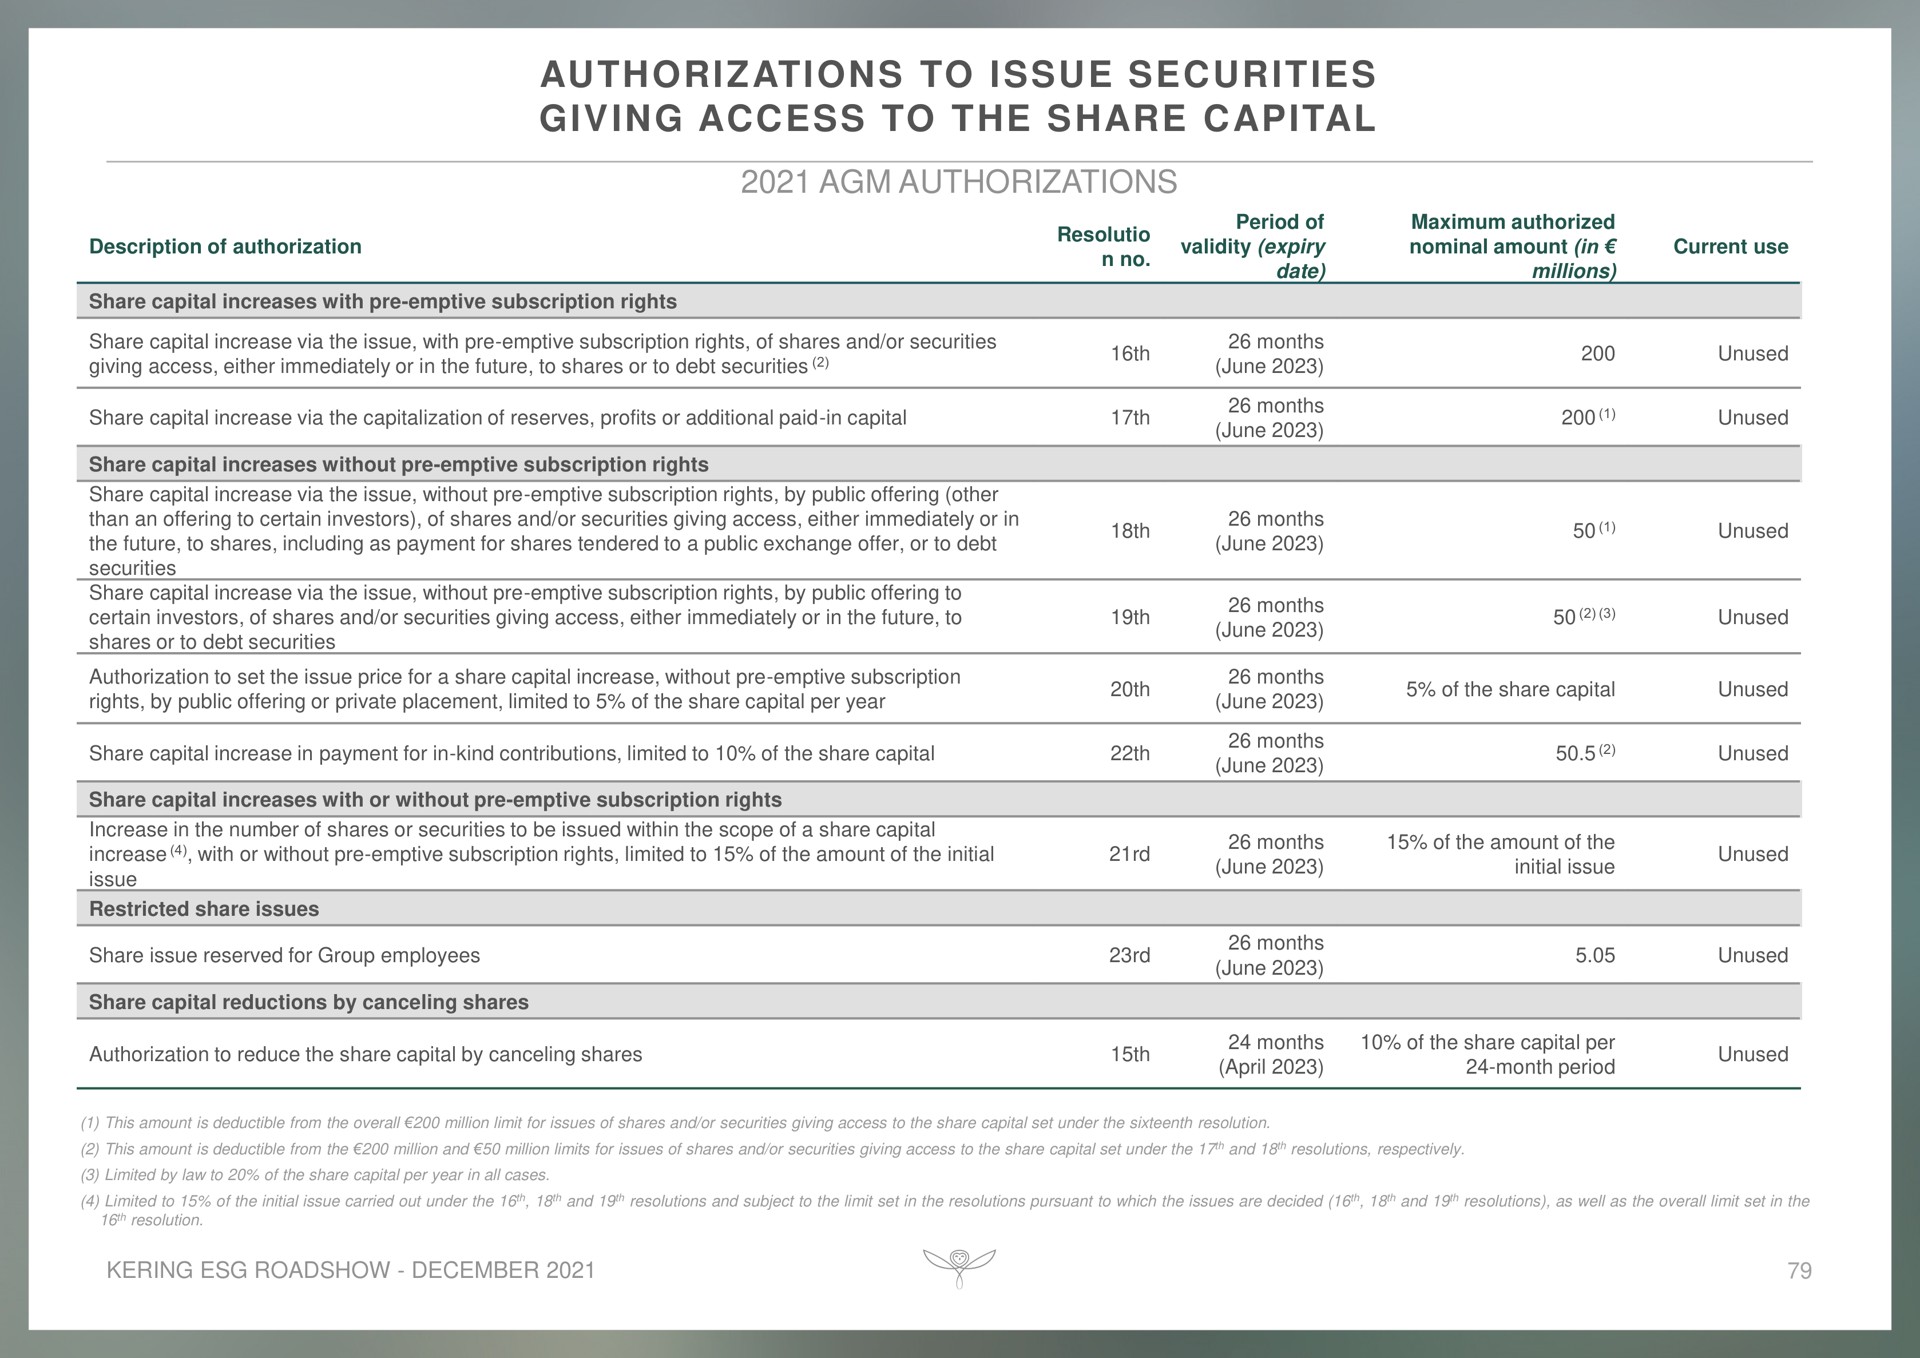 authorizations to issue securities giving access to the share capital | Kering